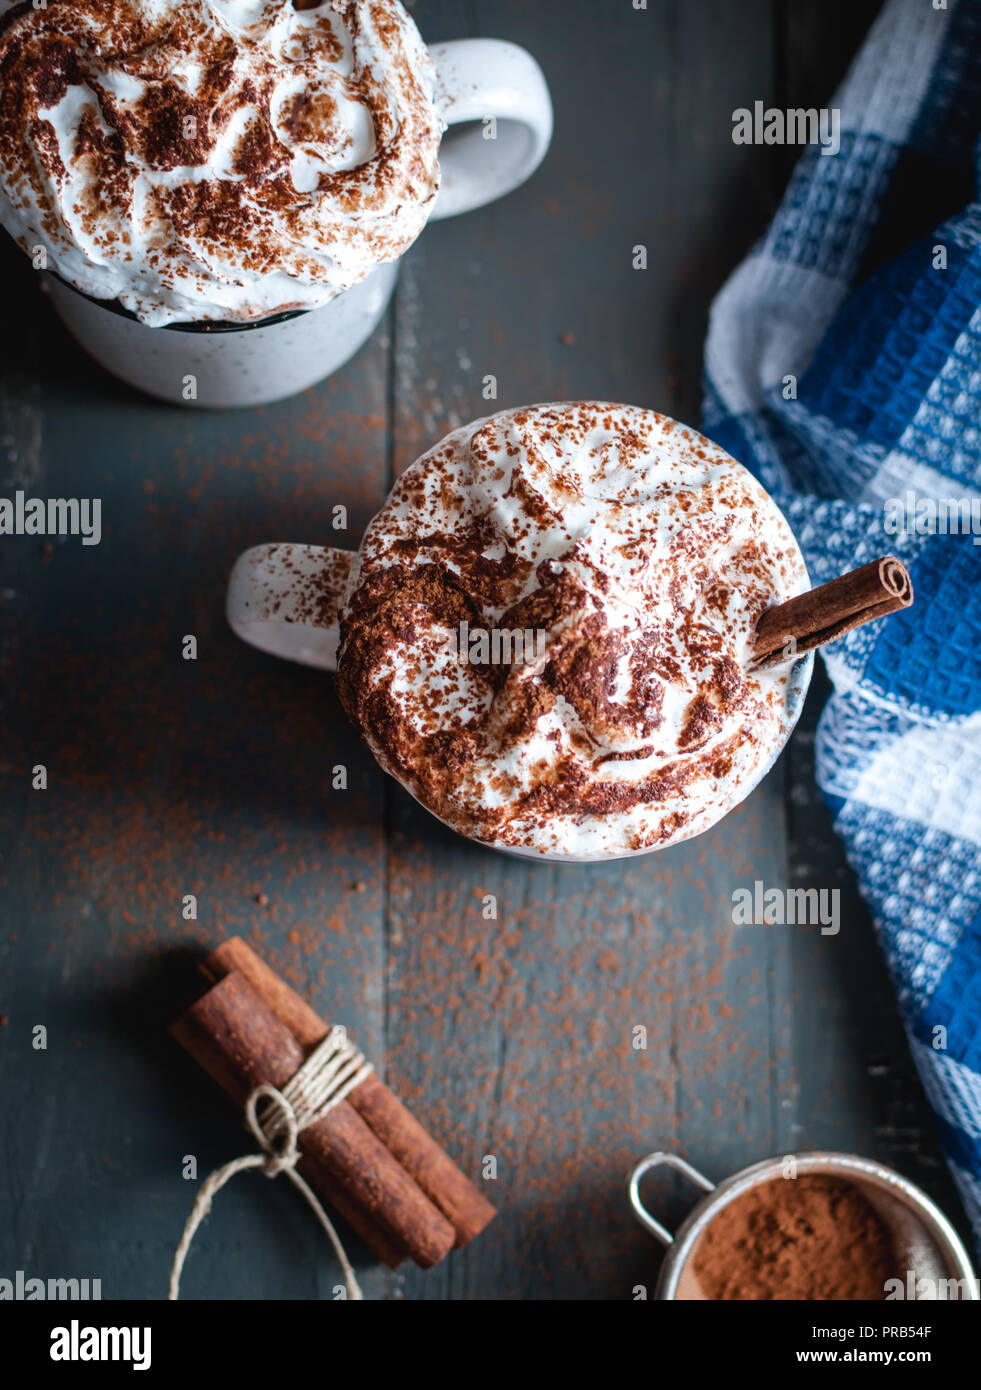 Hot cocoa with whipped cream and cinnamon stick on dark background, top view Stock Photo